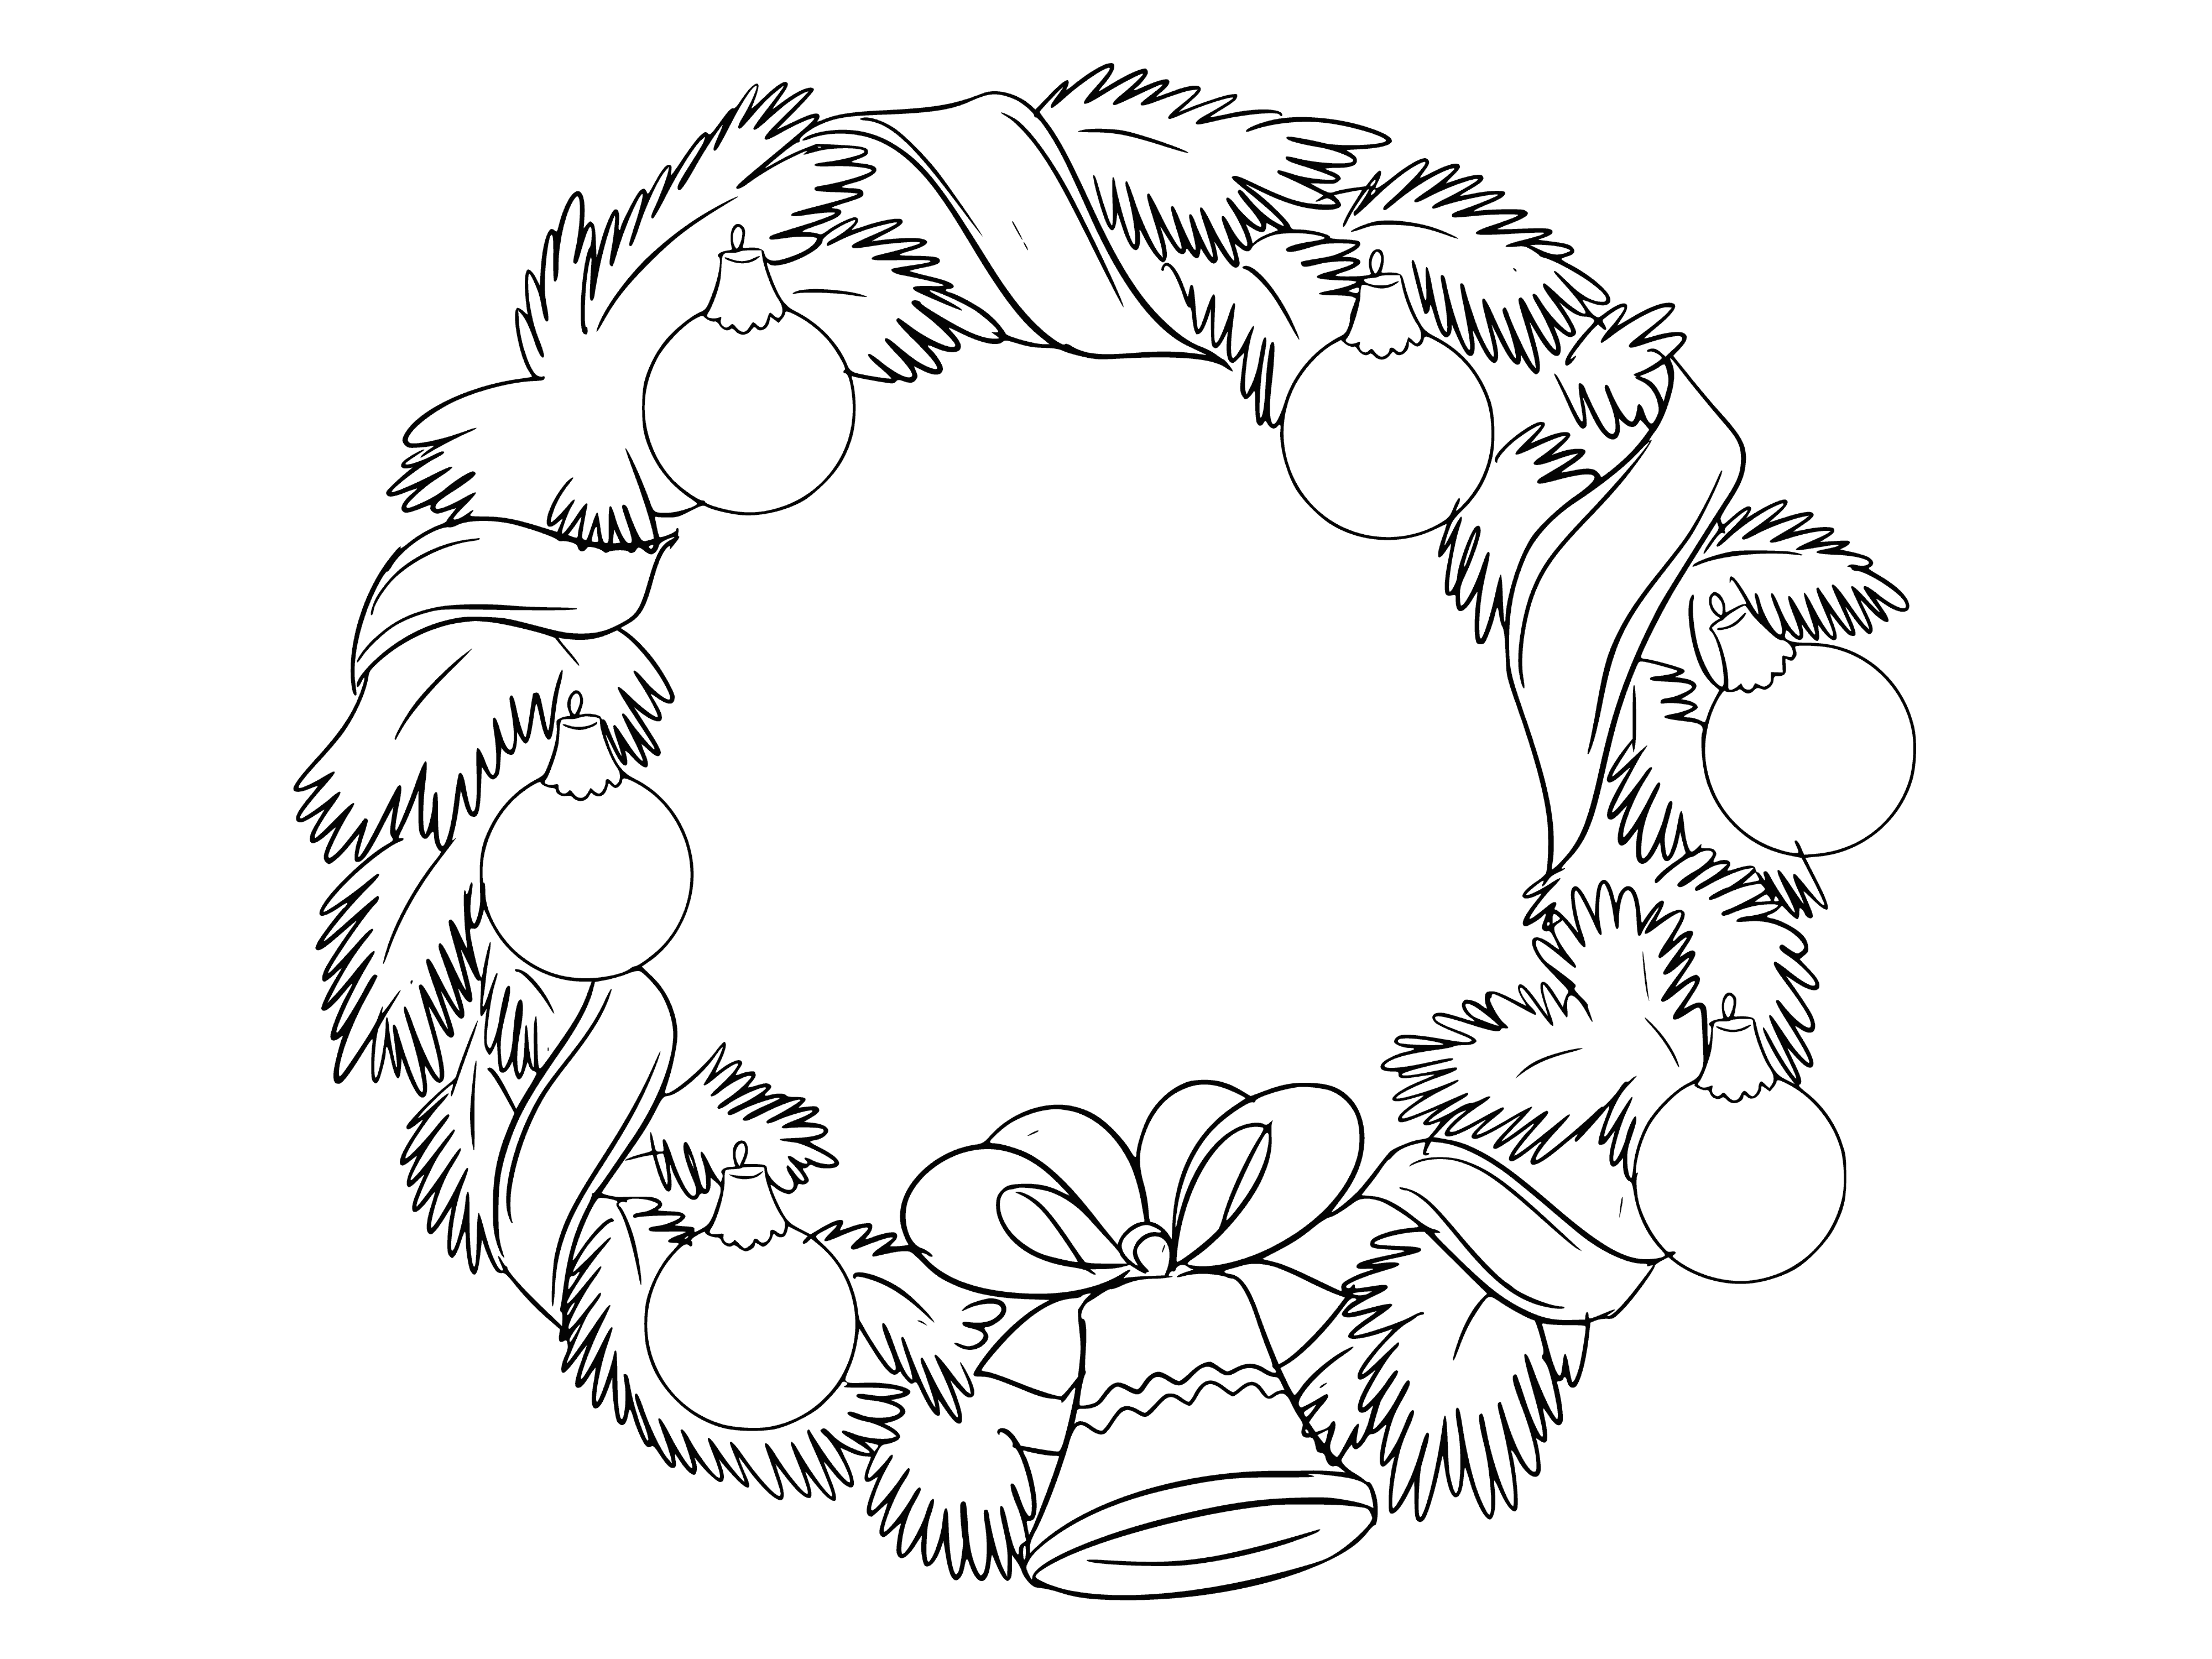 coloring page: 2 wreaths w/ green leaves, red berries & gold stars in center. Perfect for coloring to get into the holiday spirit!